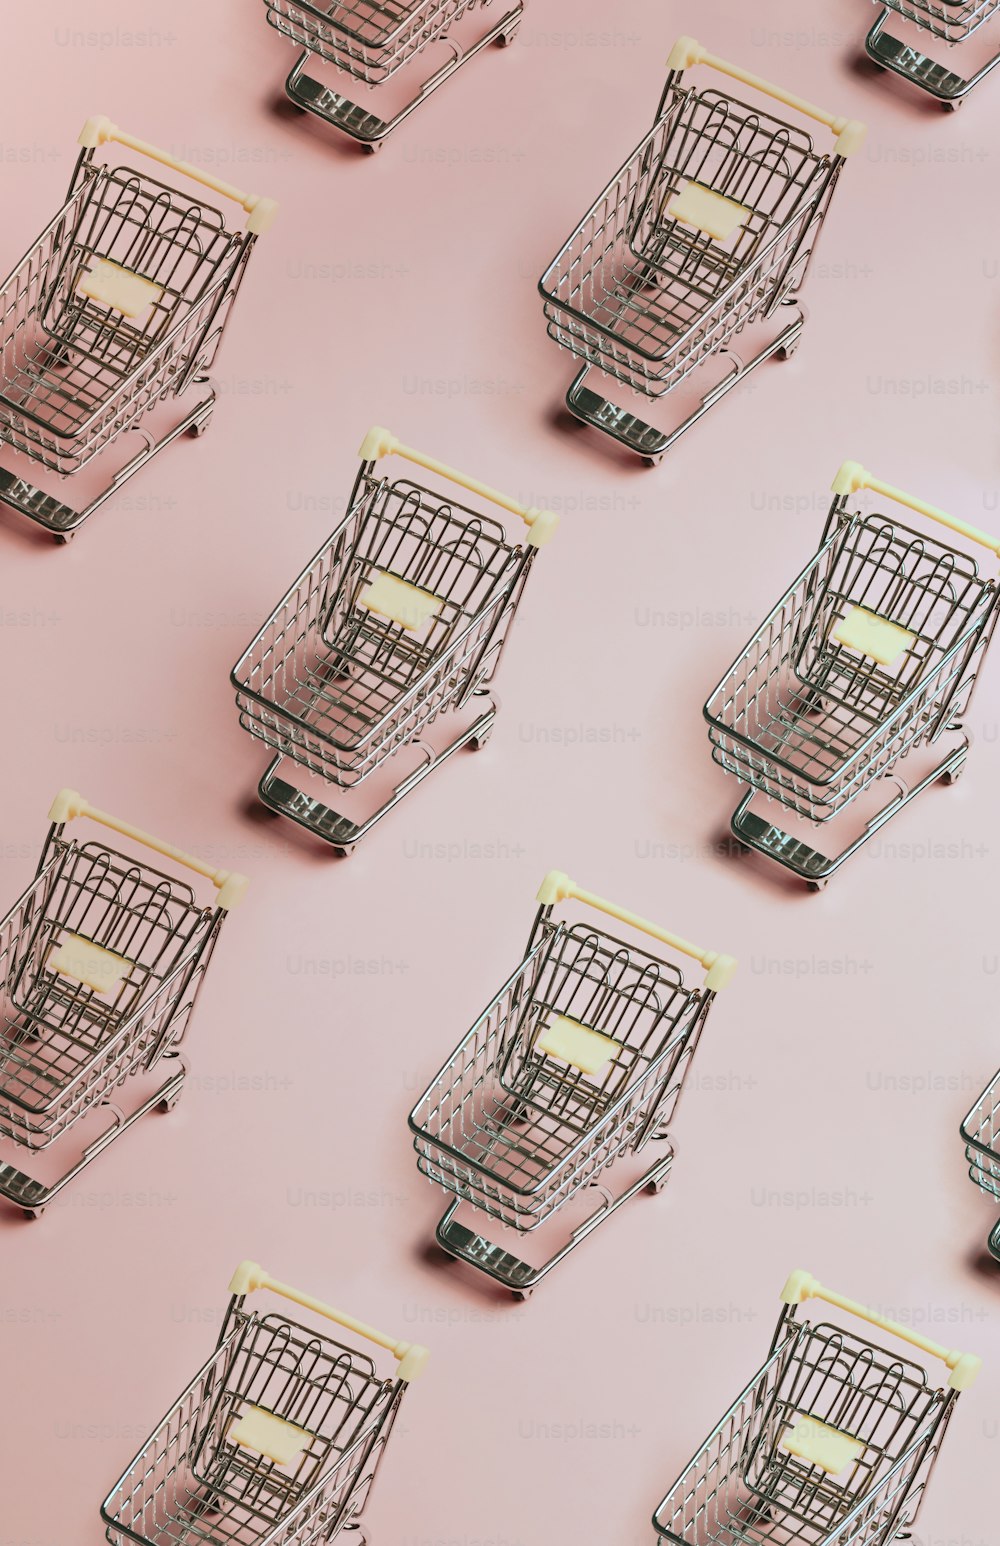 a group of shopping carts sitting on top of a pink surface